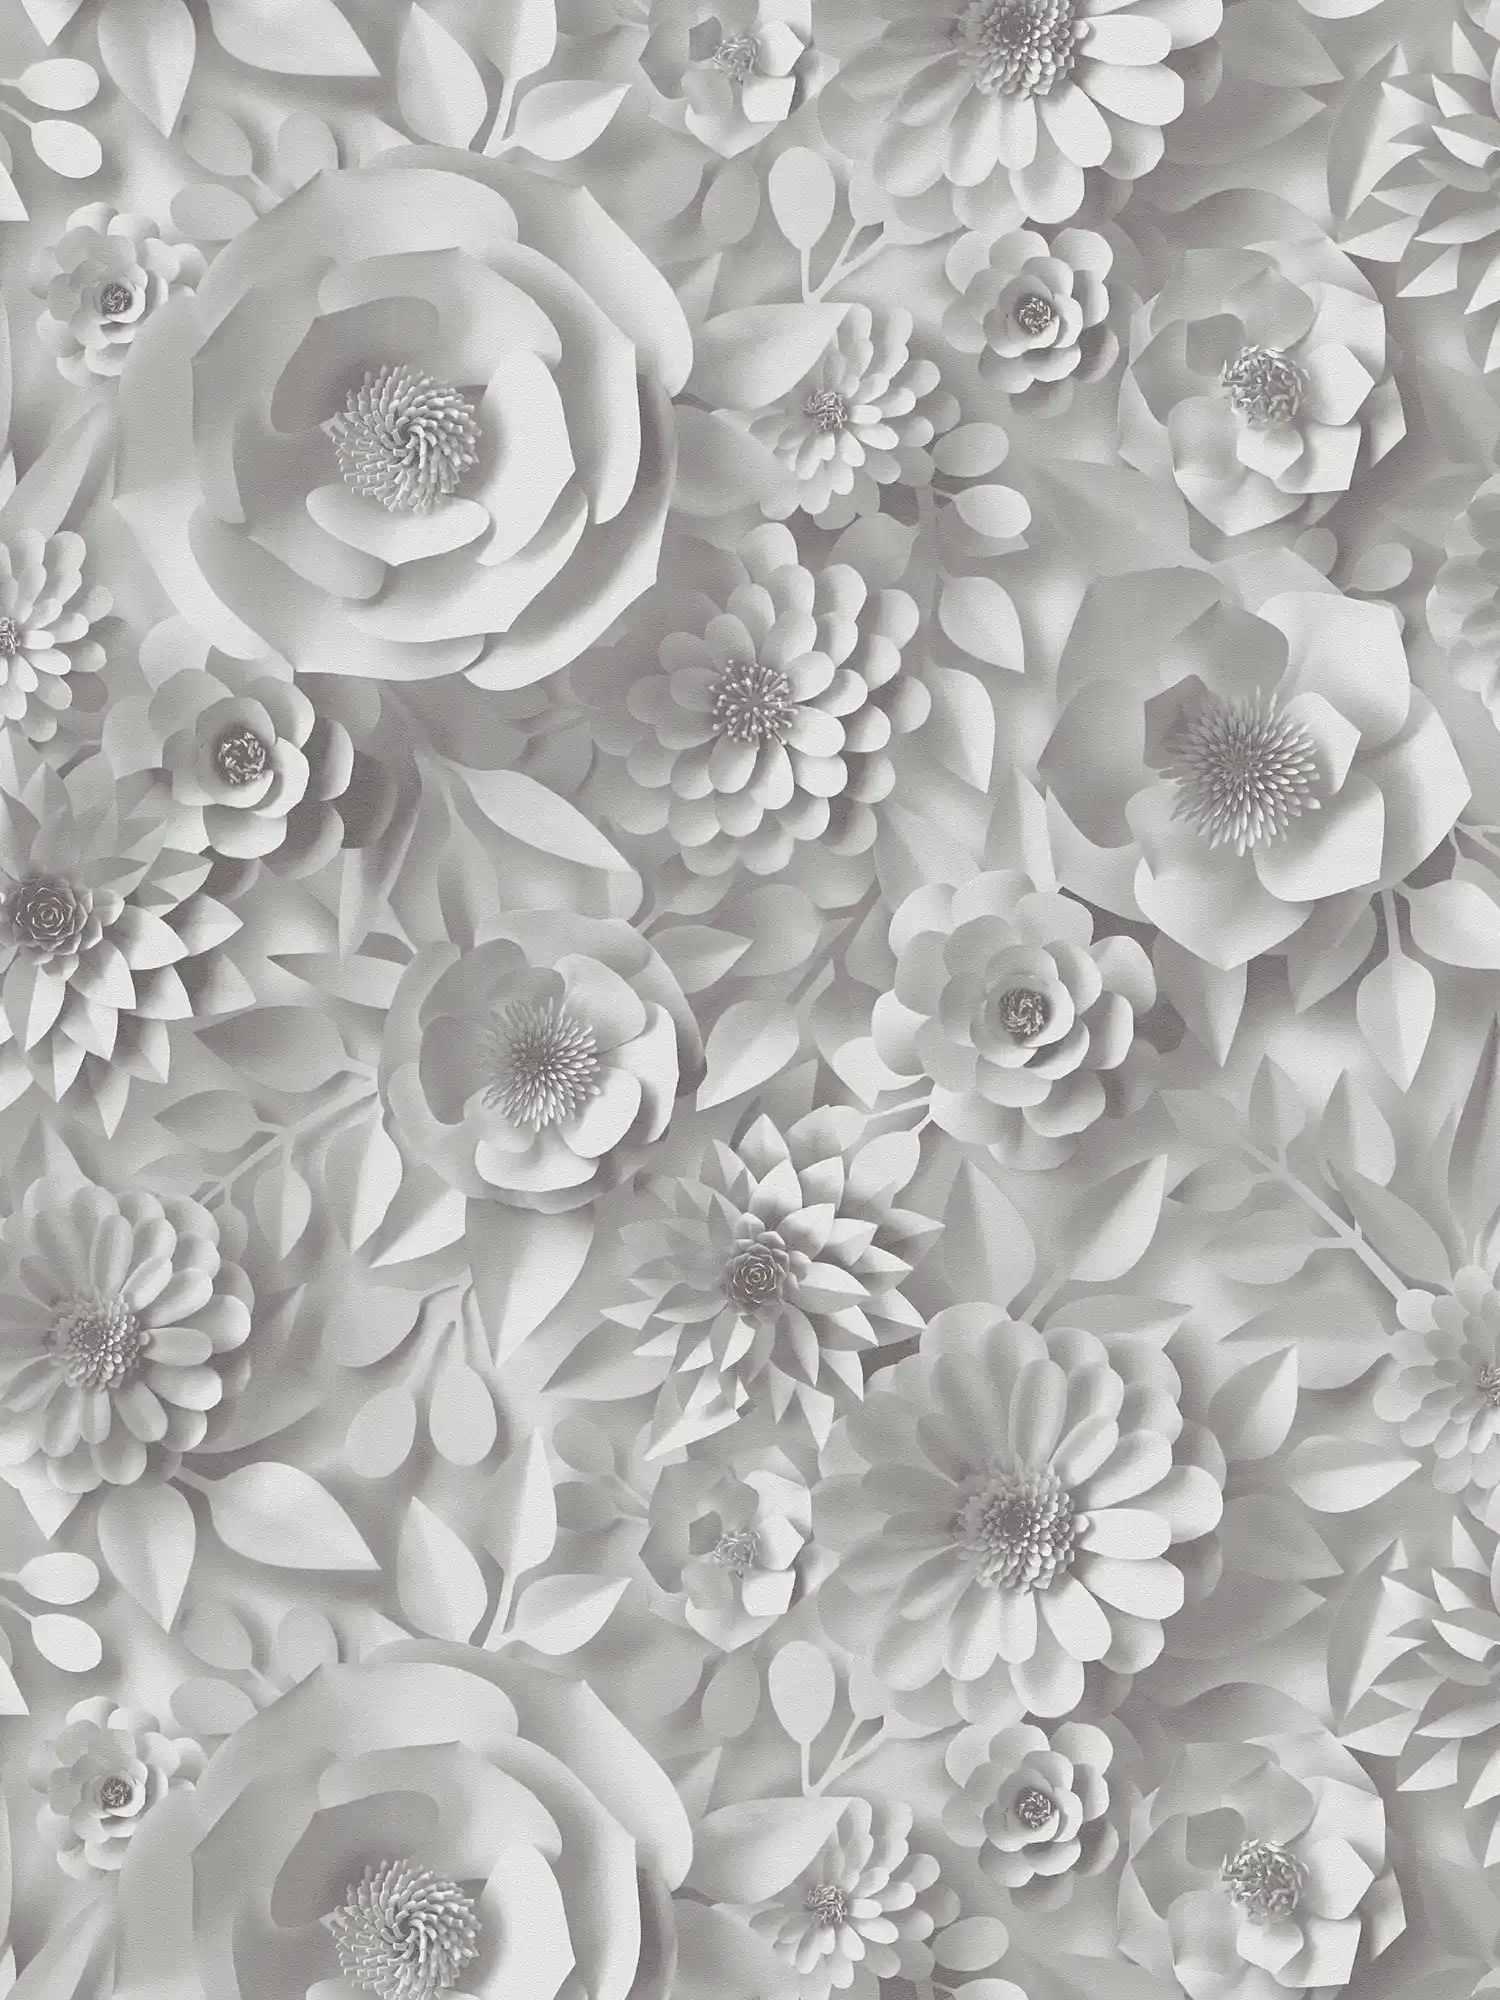 3D wallpaper with paper flowers, graphic floral pattern - white
